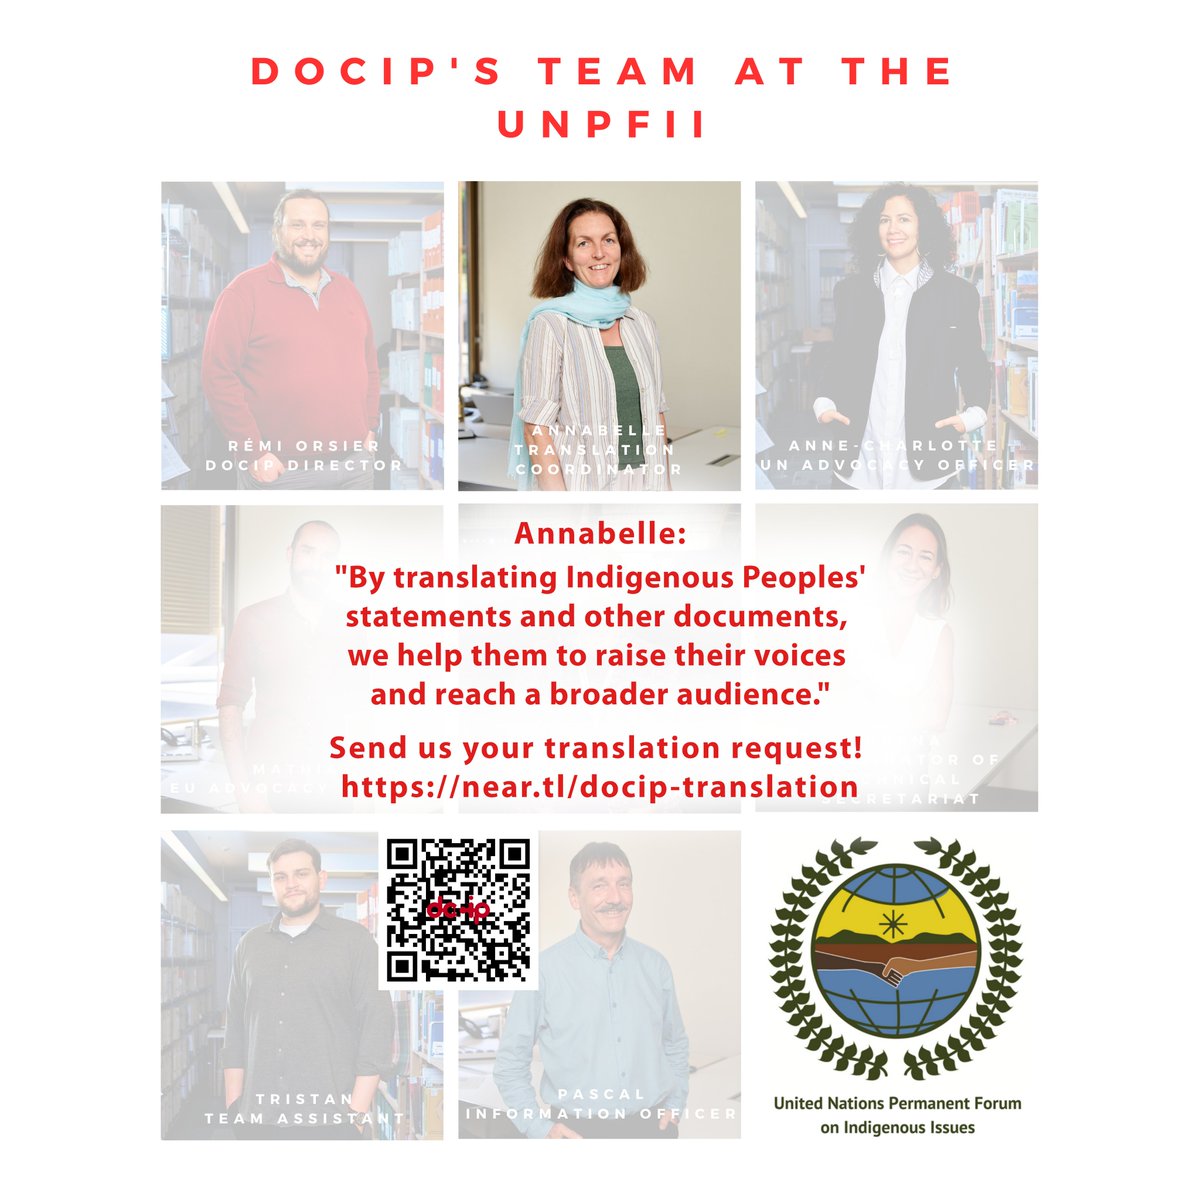 Docip at UNPFII - Annabelle: By translating Indigenous Peoples' statements and other documents, we help them to raise their voices and reach a broader audience. Send us your translation request! near.tl/docip-translat… #UNPFII #IndigenousRights #DocipTeam